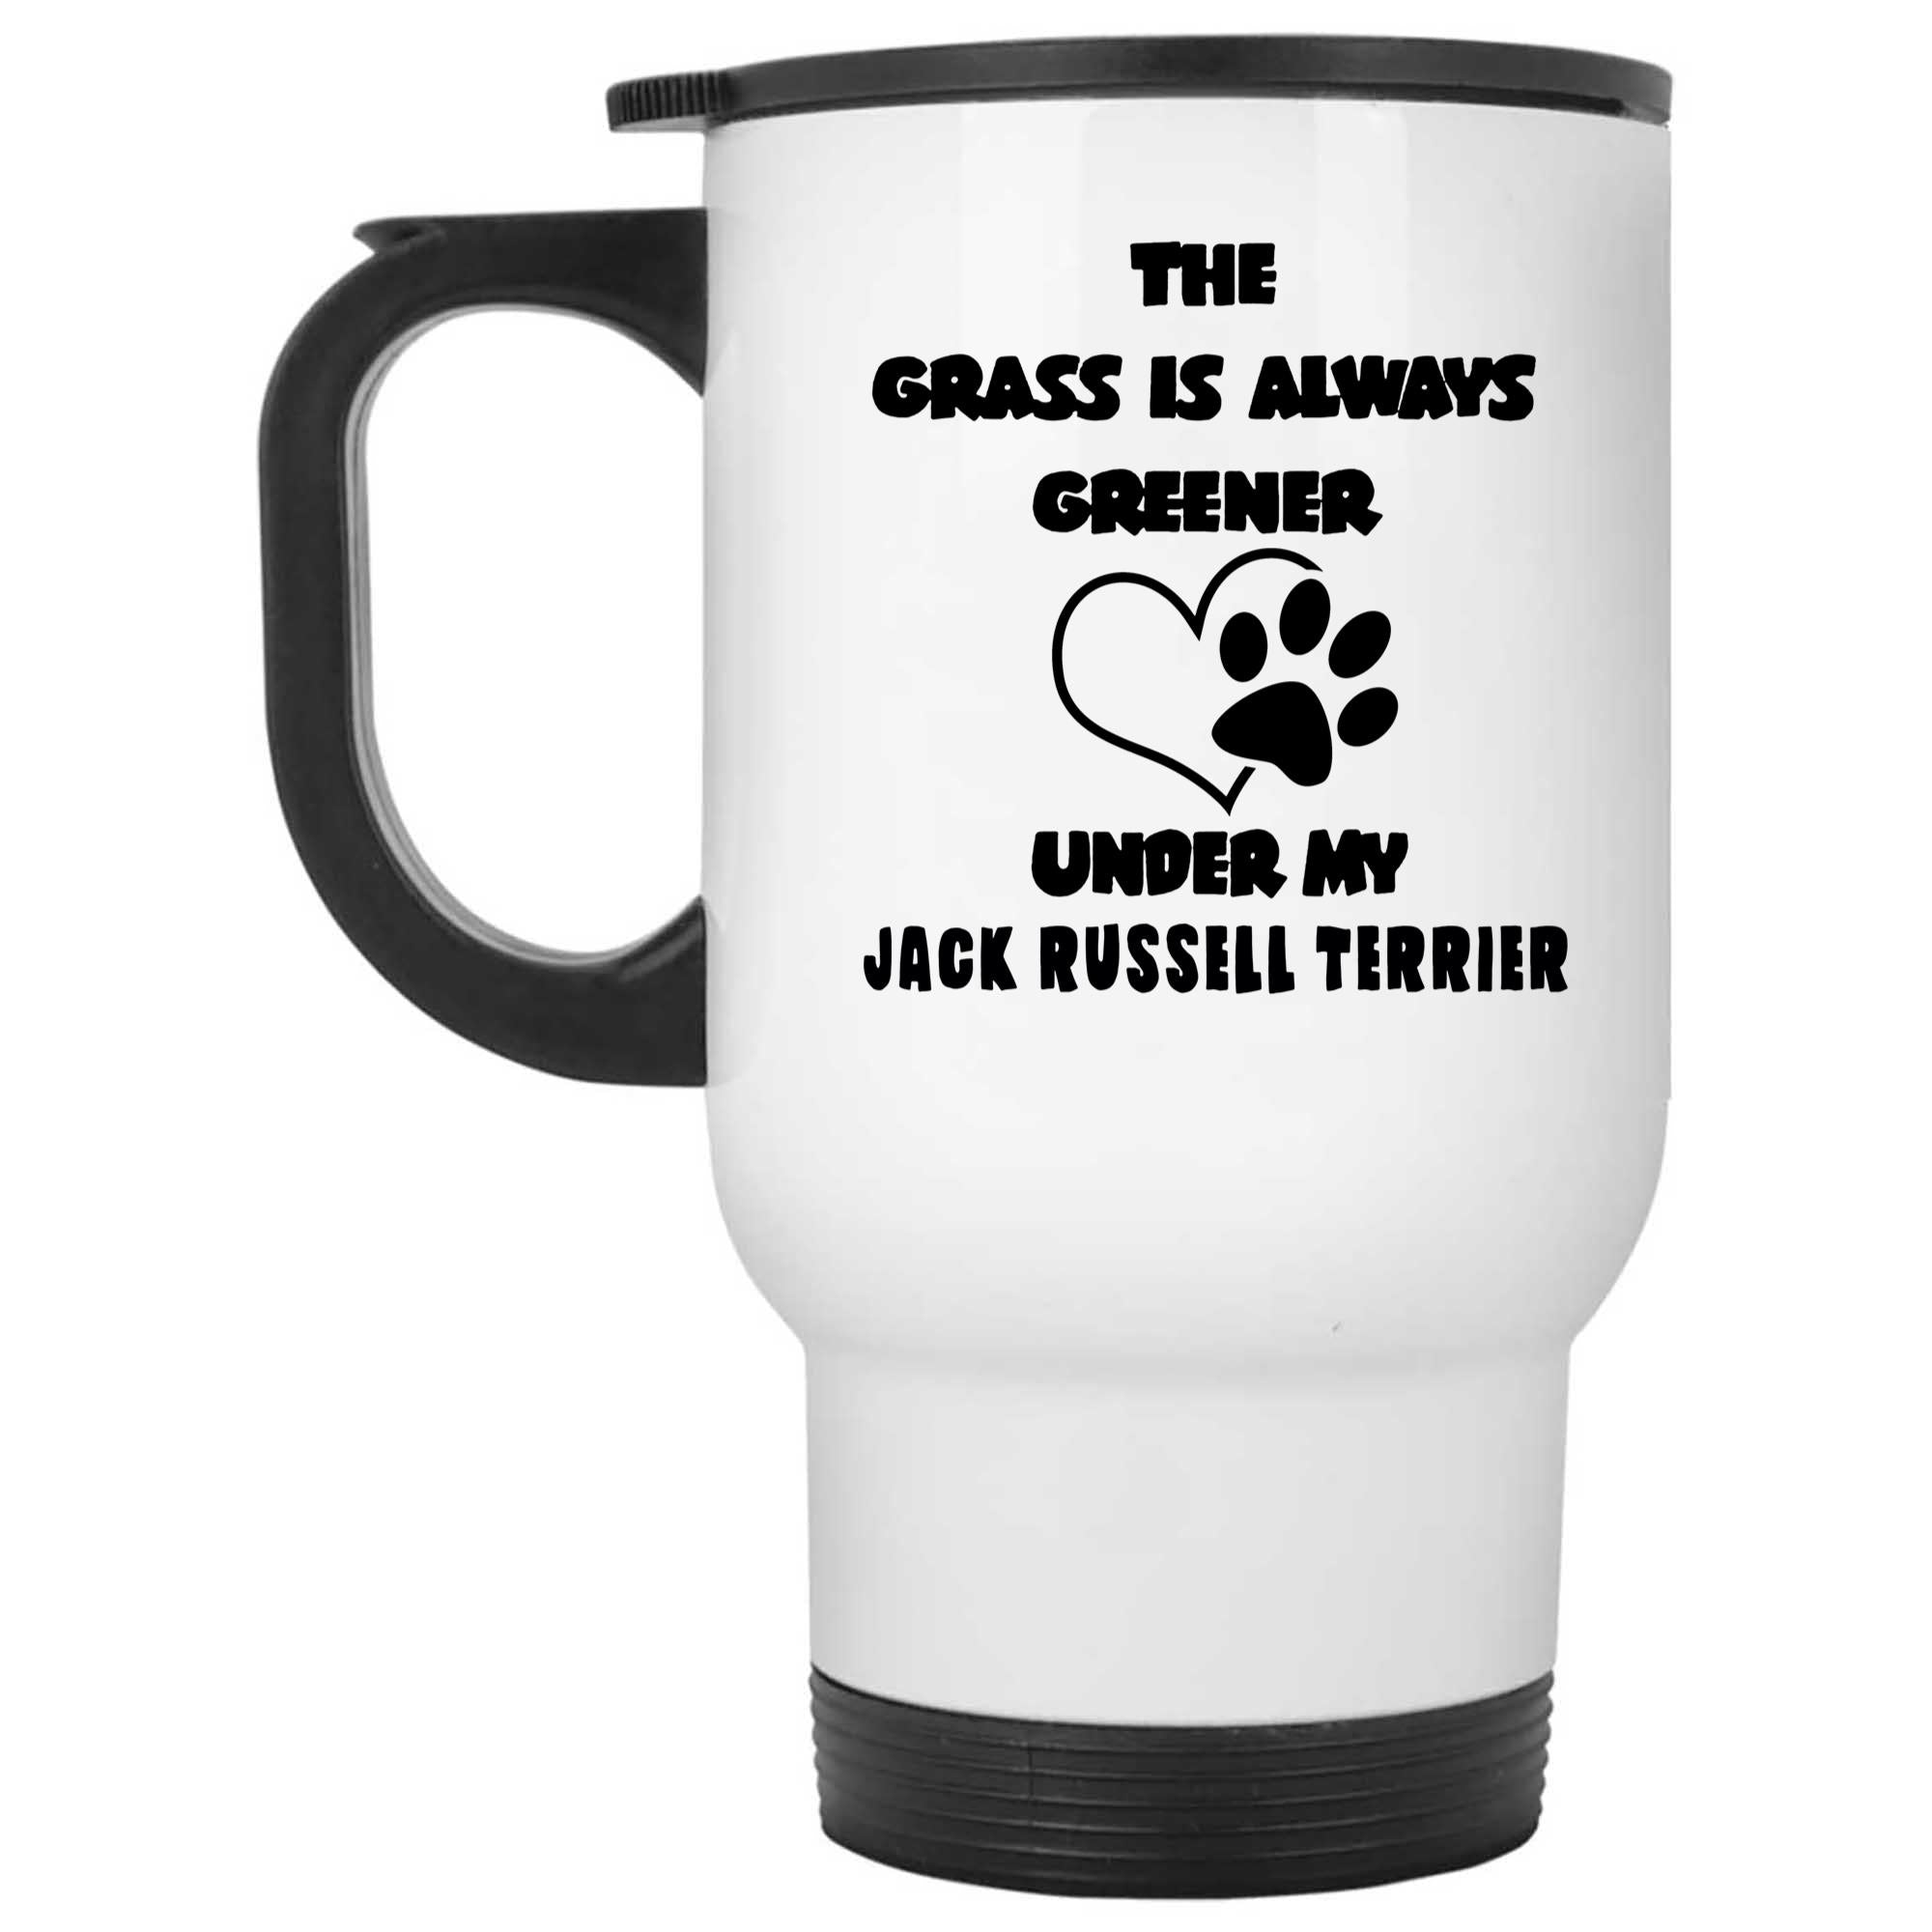 Skitons Funny Ceramic Novelty Coffee Mug The Grass Is Always Greener Under My Jack Russell Terrier Dog Funny Sarcastic, Dog Lover QFrwgLj